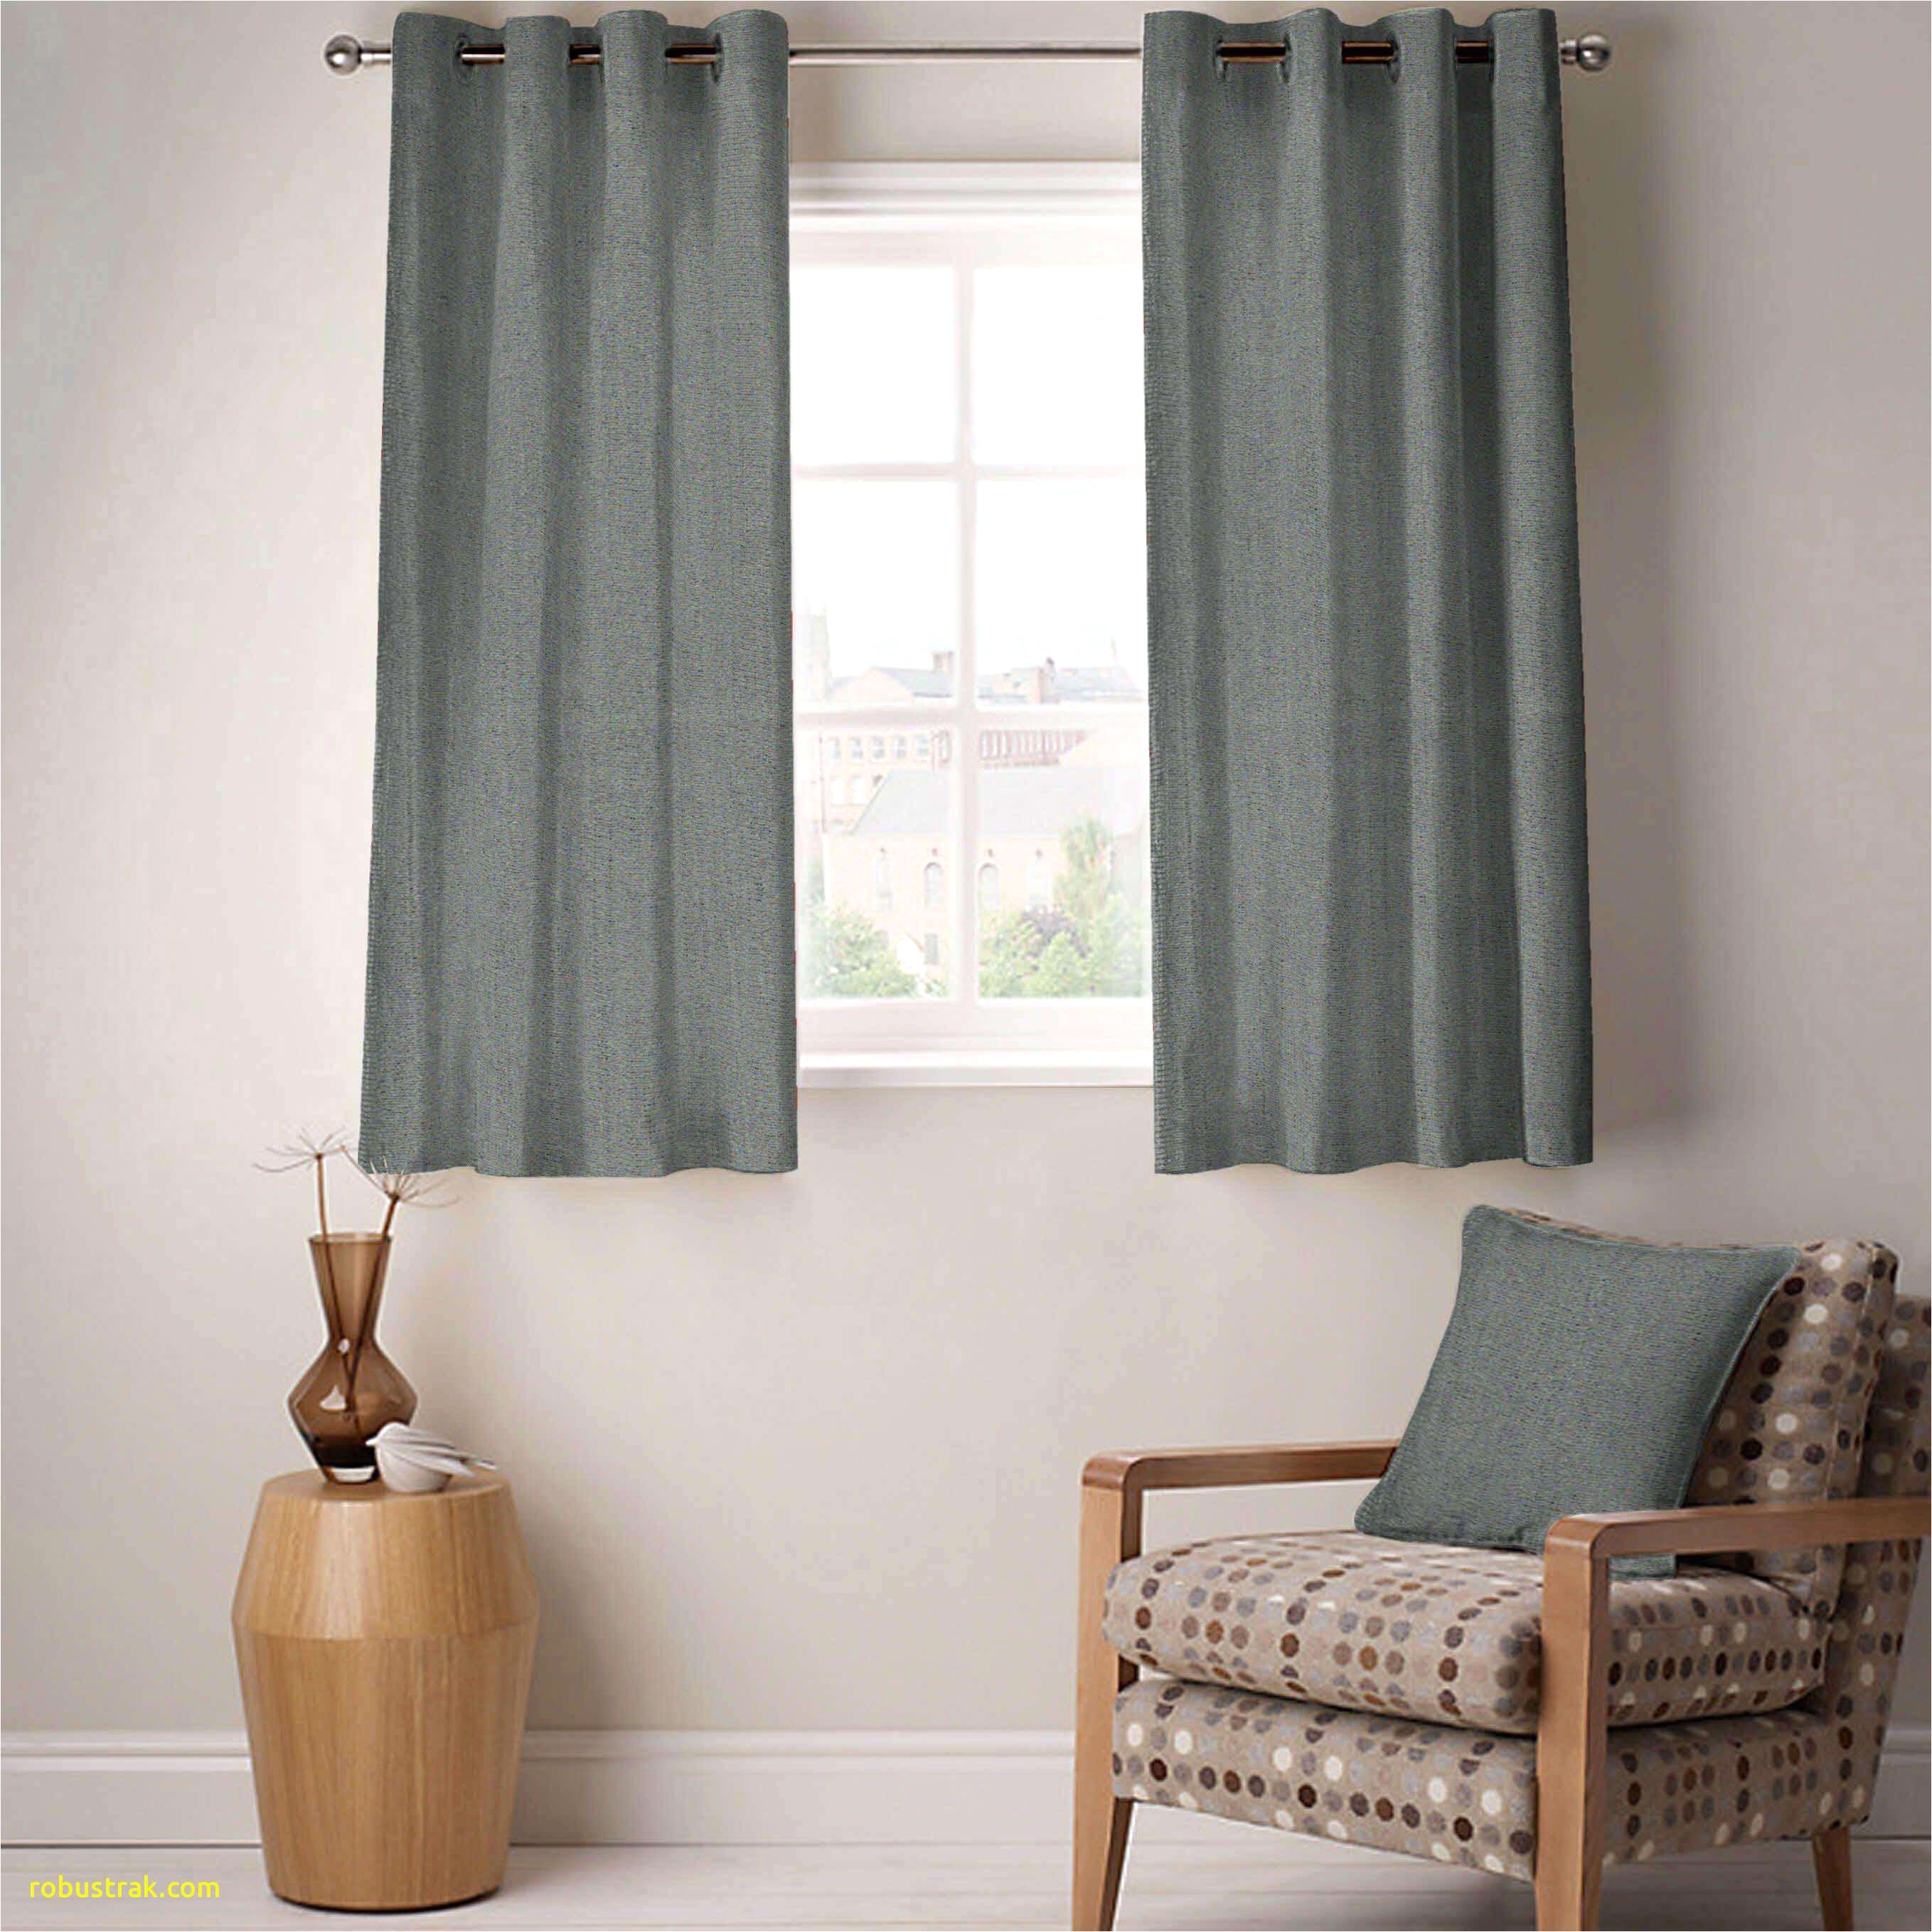 full size of furniture unique curtain rods unique porch curtains 0d tags amazing unique porch 29 beautiful 3 panel curtains from hollow interior doors